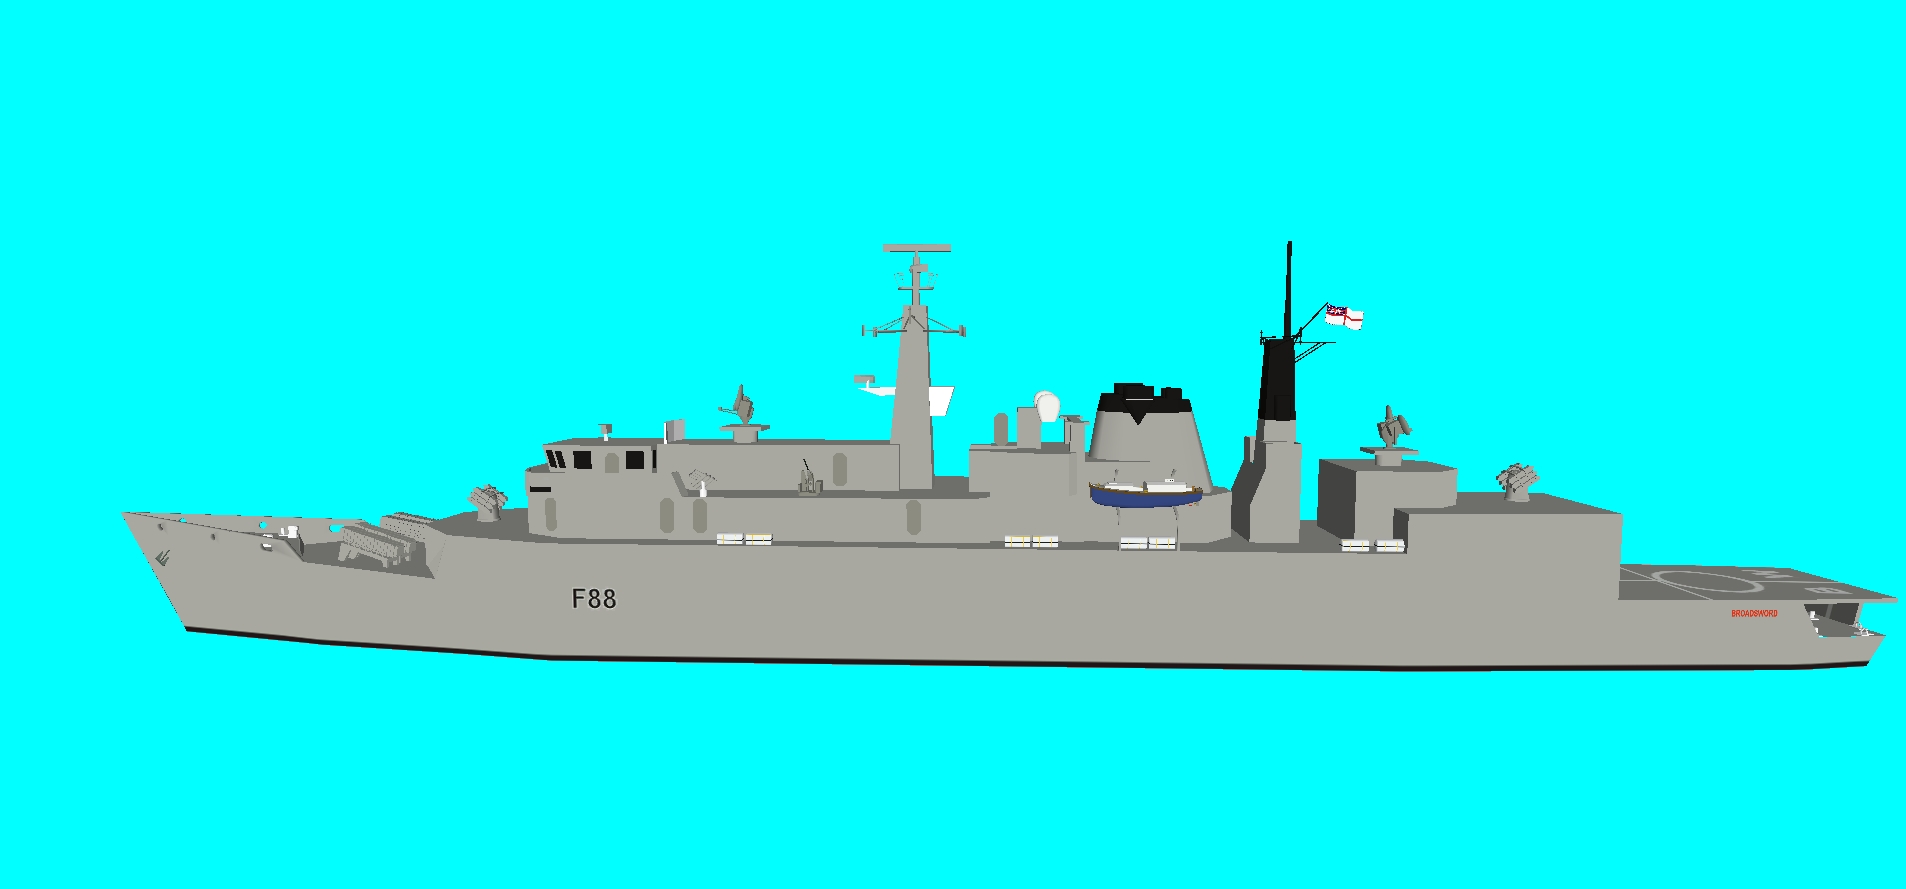 HMS Broadsword (F88); lead ship of the class, a Batch 1 vessel shown in original form with Exocet, Sea Wolf, 40mm Bofors and no torpedo tubes.